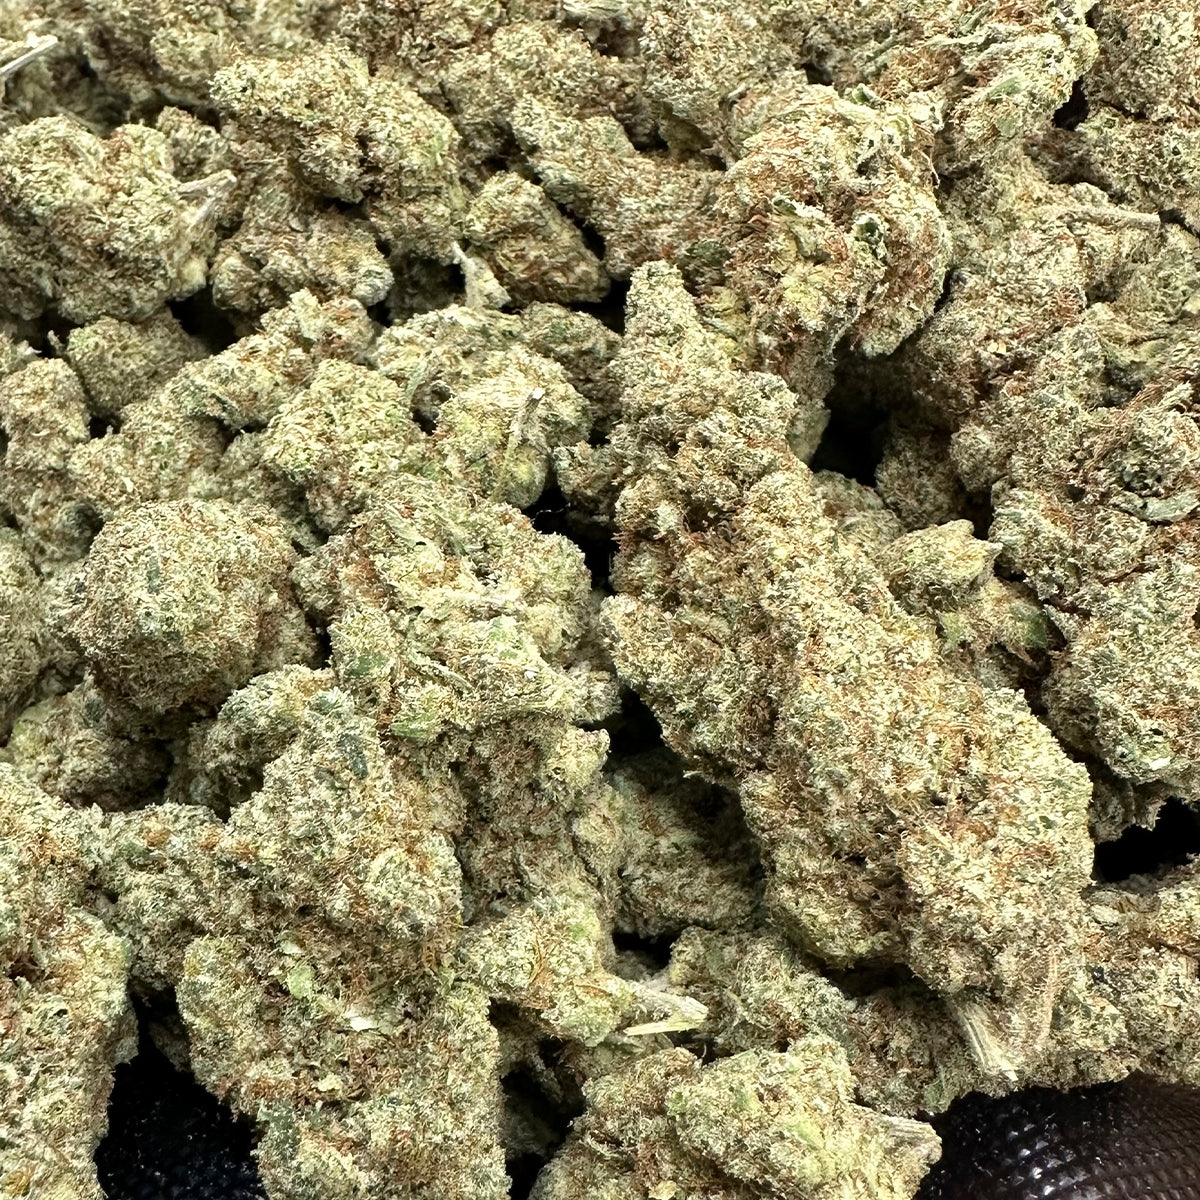 Lemon Pound Cake Sativa Premium Hemp Flower - This sativa leaning hybrid is a citrus delight. With the dominant terpene as caryophyllene and Light green, tight, dense nugs. Lemon Pound cake is known to provide a talkative uplifting experience. Available in 3.5g and 14g size jars.